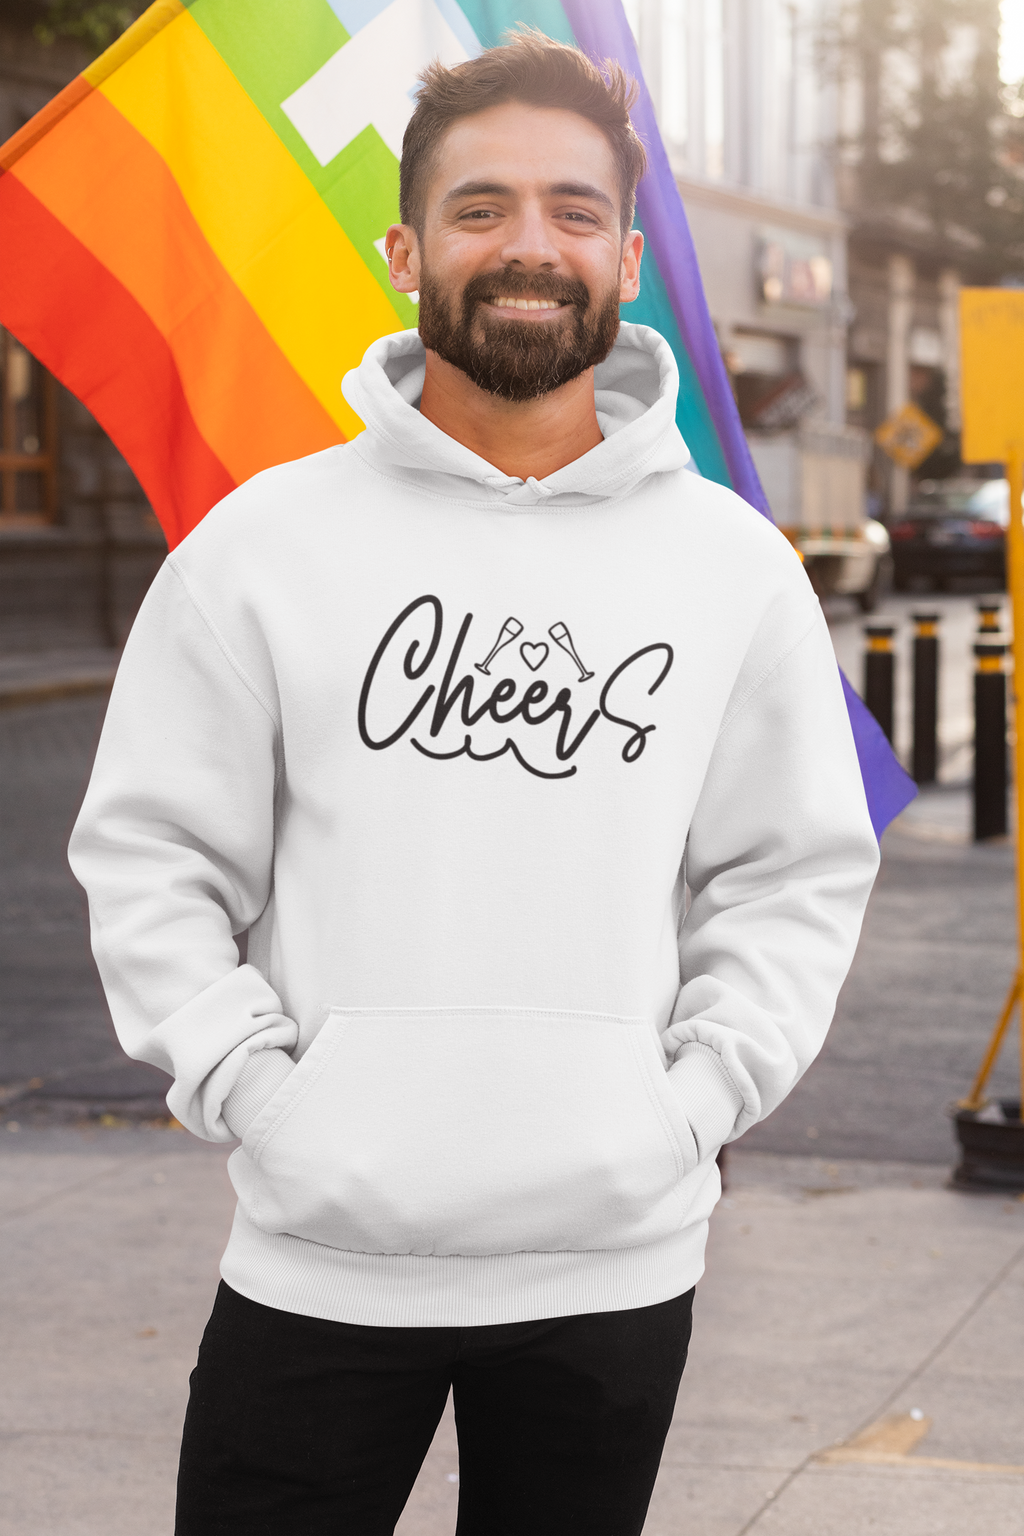 Cheers Unisex Hooded Sweatshirt, Classic Fit, Gift Item - Cheers Together Gift House